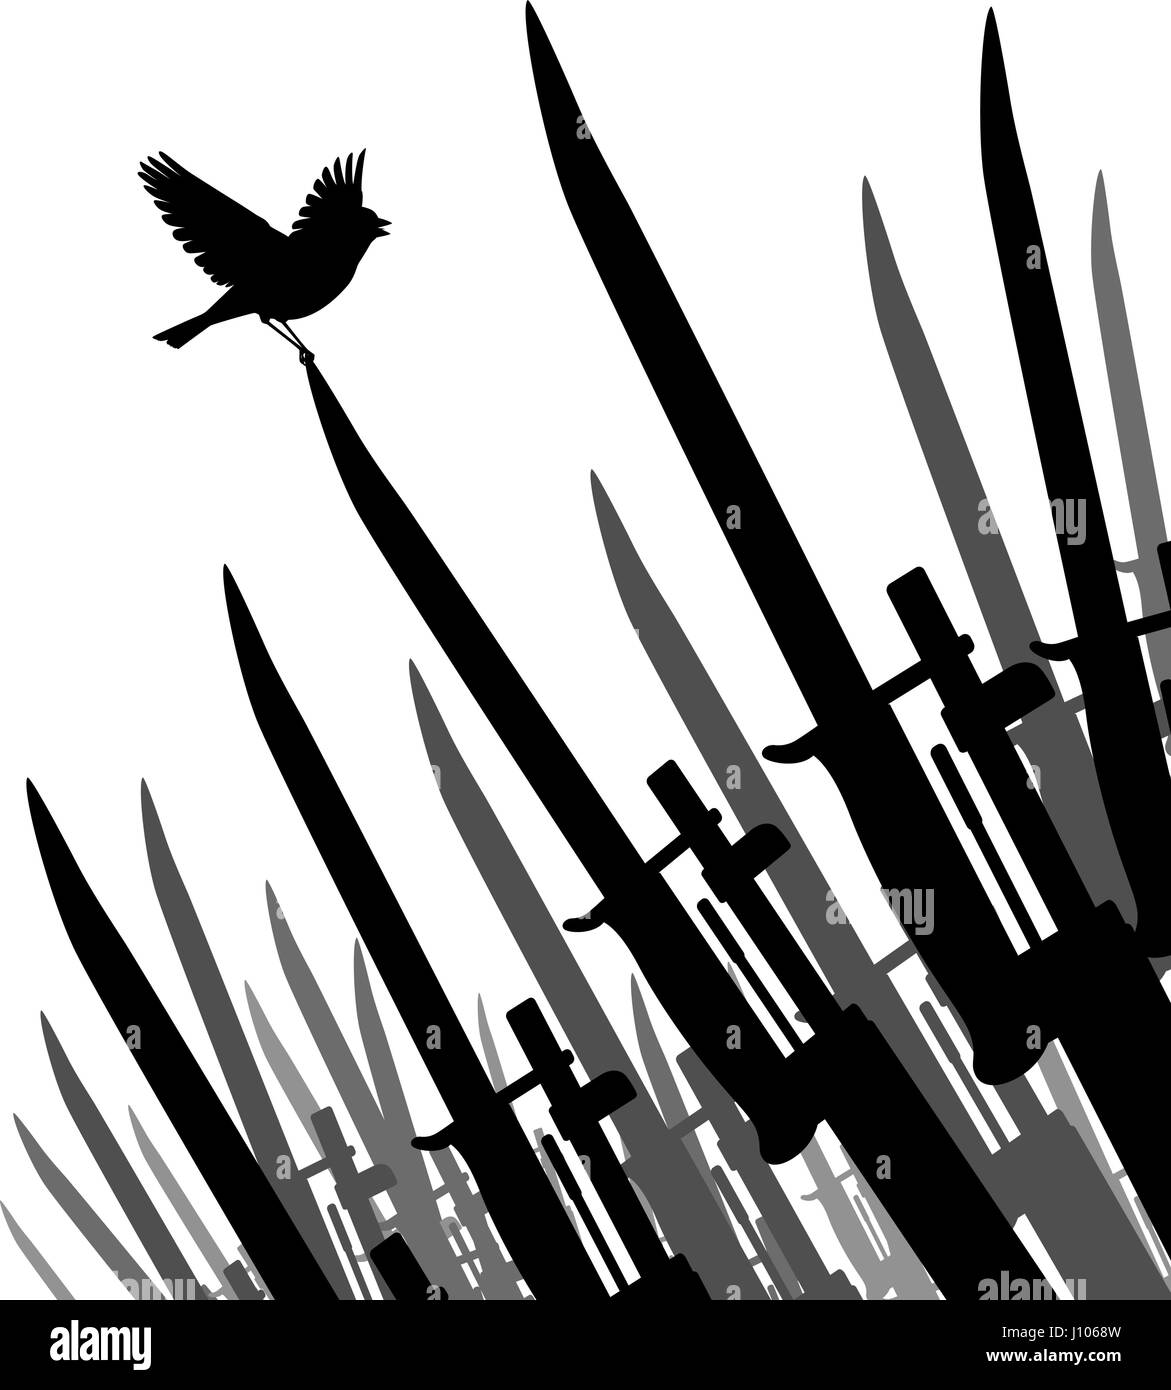 Editable vector silhouette of a singing bird perched on the tip of a bayonet as a symbol of peace Stock Vector